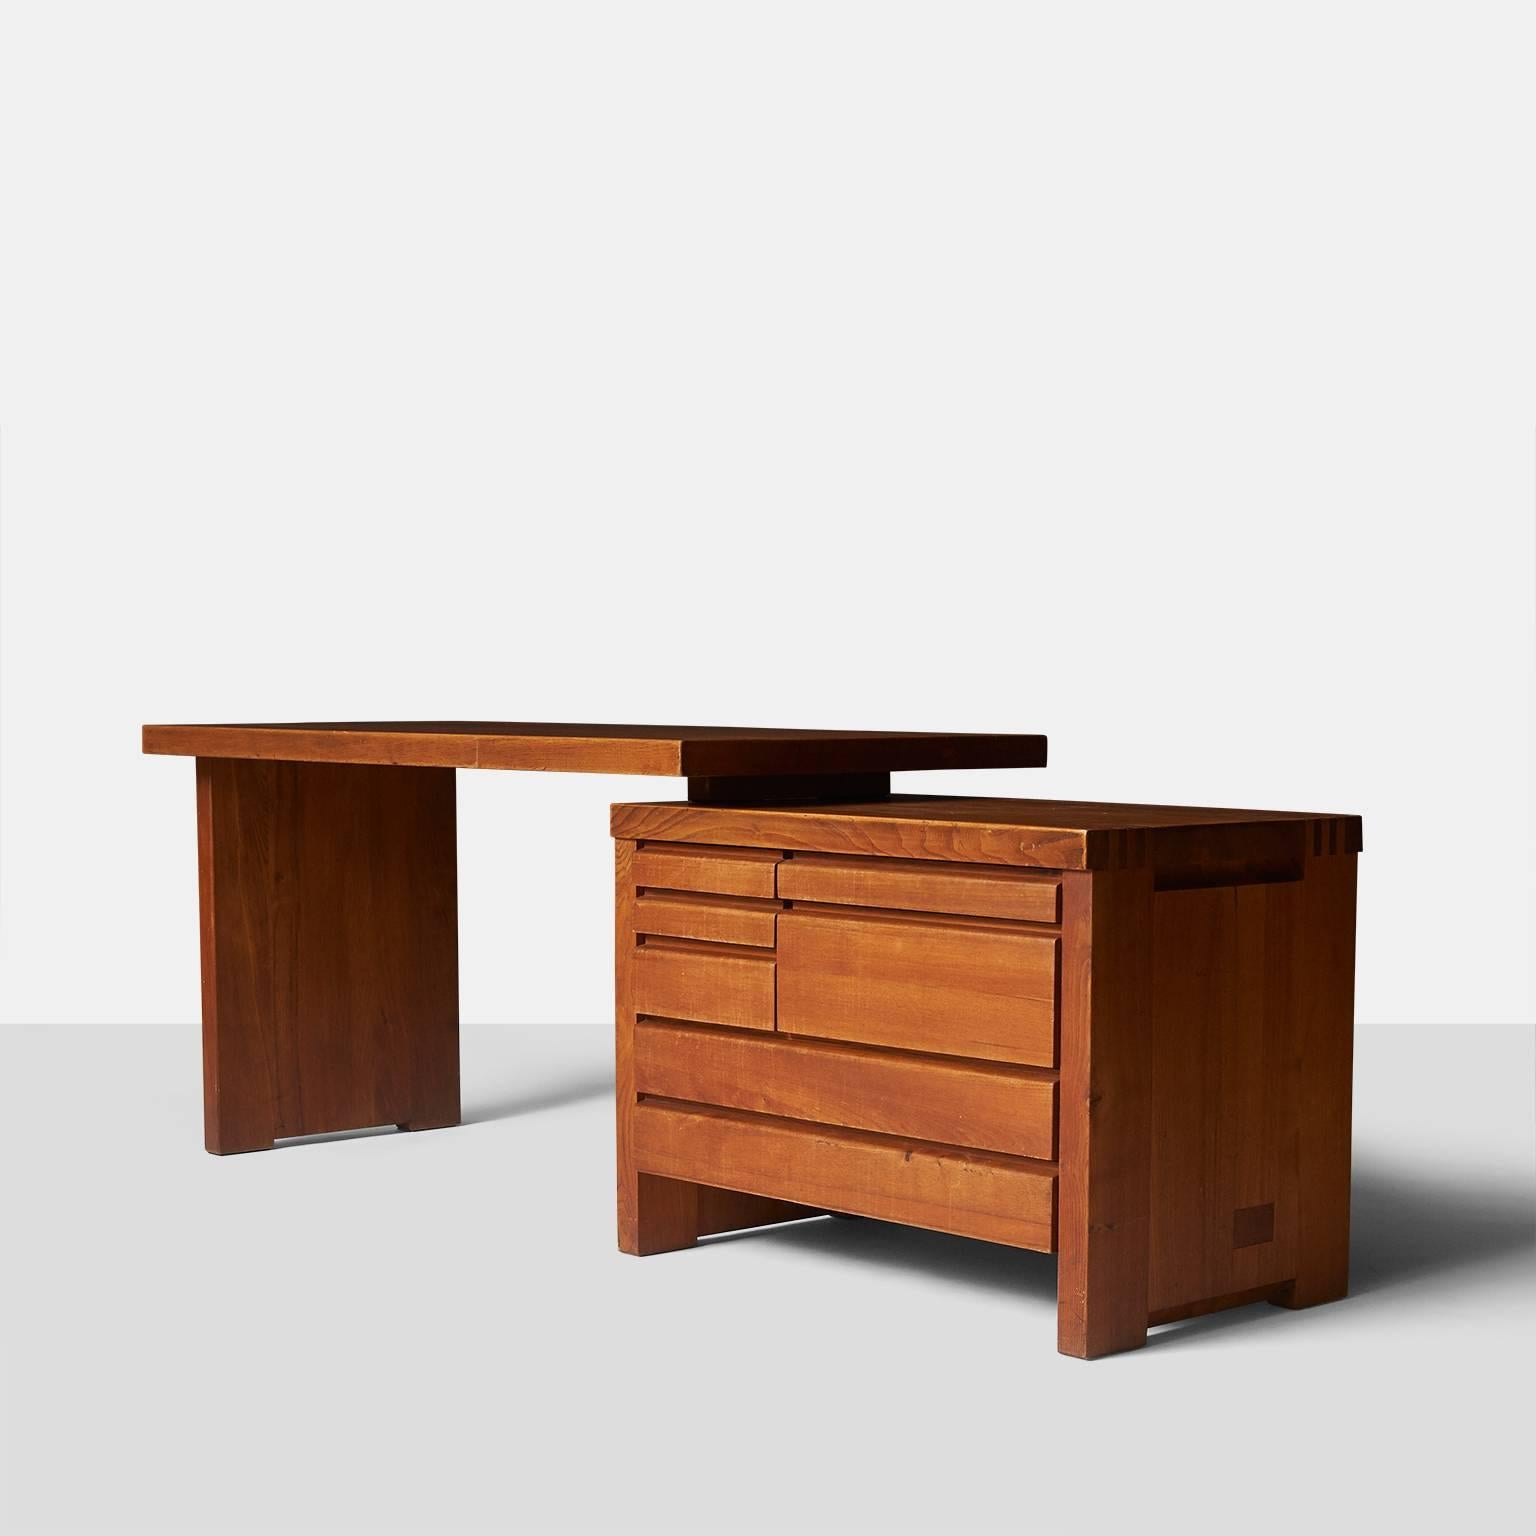 A solid elmwood desk with wood dowels by Pierre Chapo, France, circa 1960s. The desk top floats over the chest that has three pencil drawers, three deeper drawers and one file drawer. The desk top can be placed to the left or right and also on an